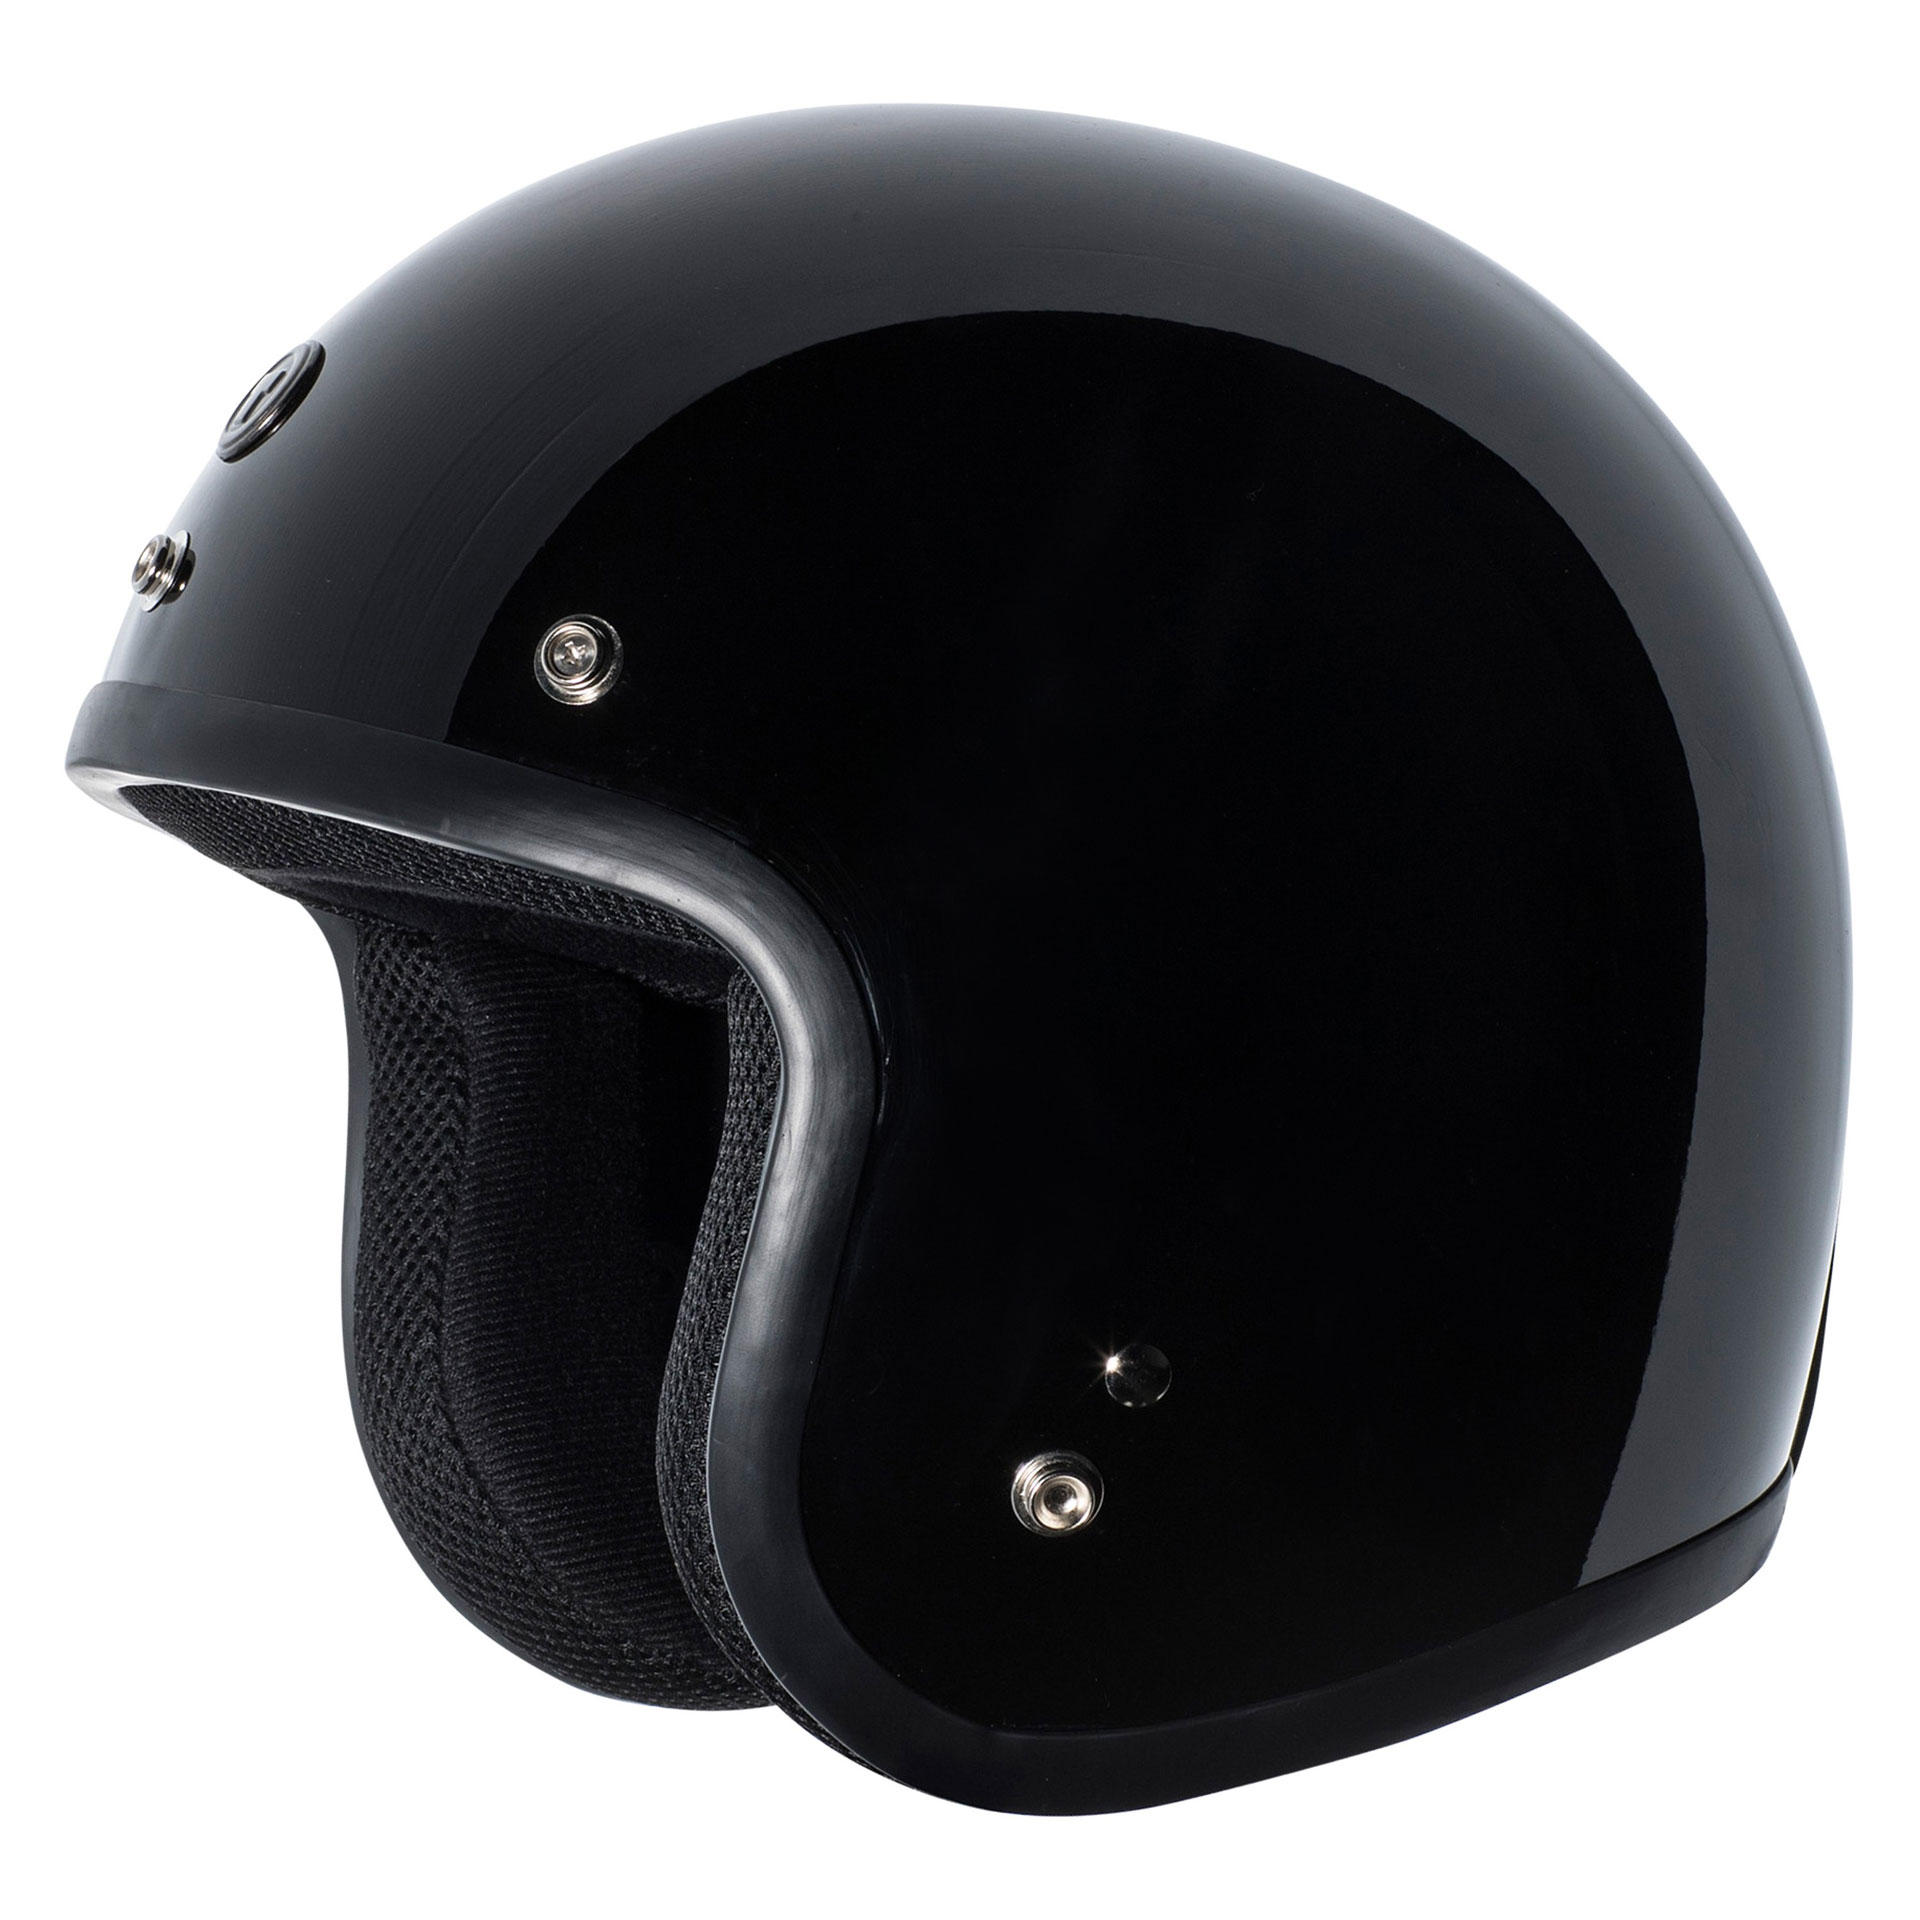 L Large Size Gloss Black Dot Adult Motorcycle Safety 3/4 Open Face Helmet 